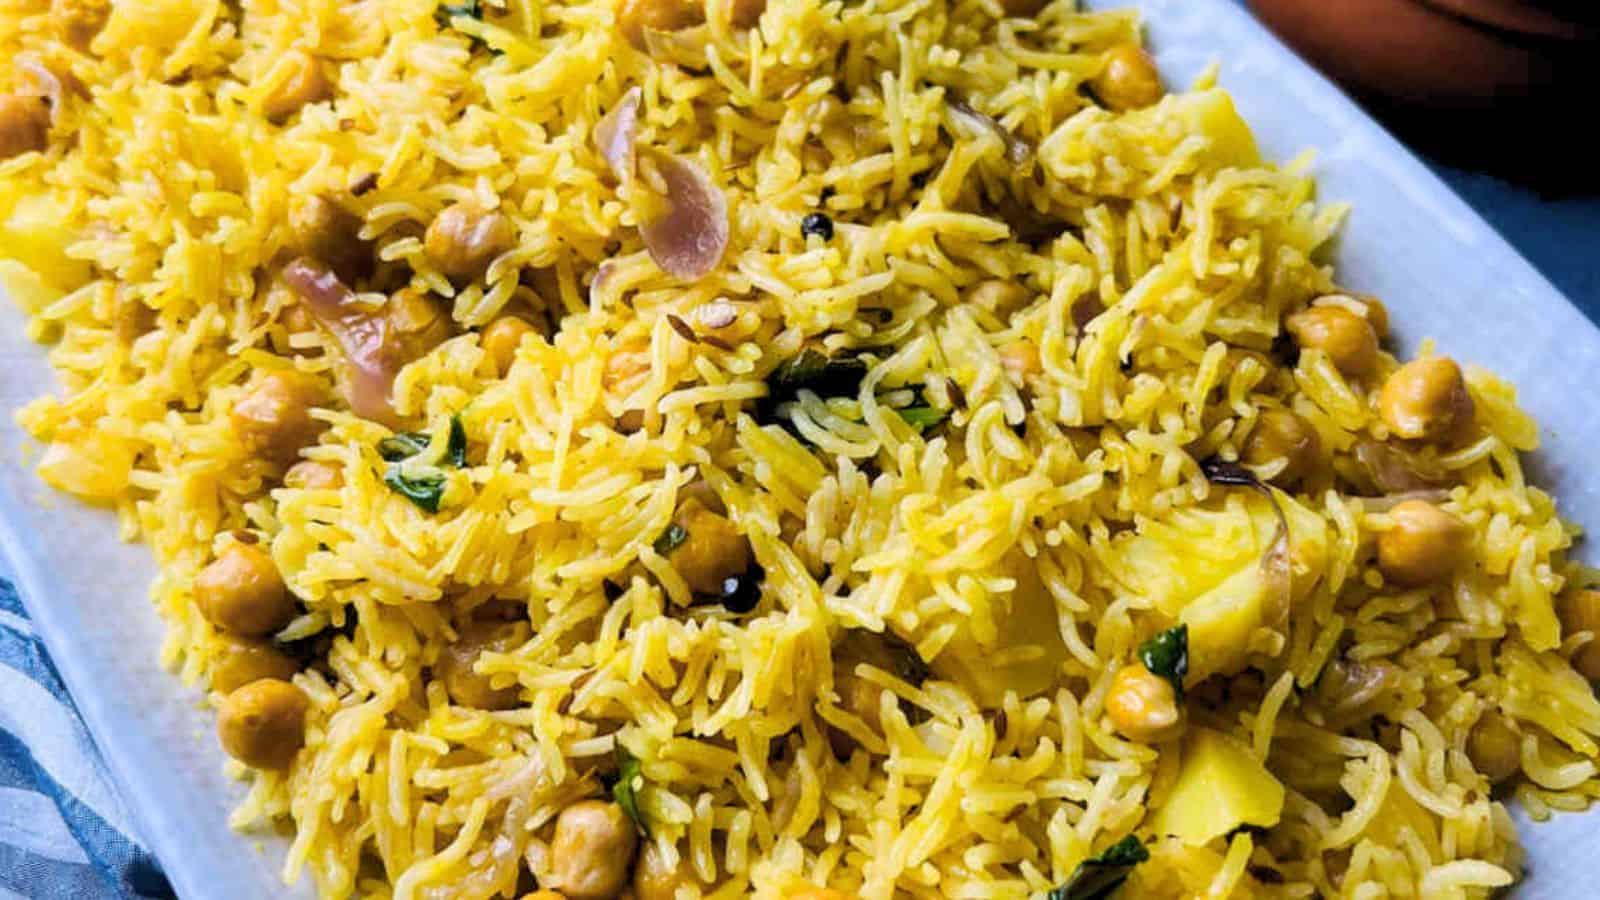 A close-up of a plate filled with Chickpea Pulao.